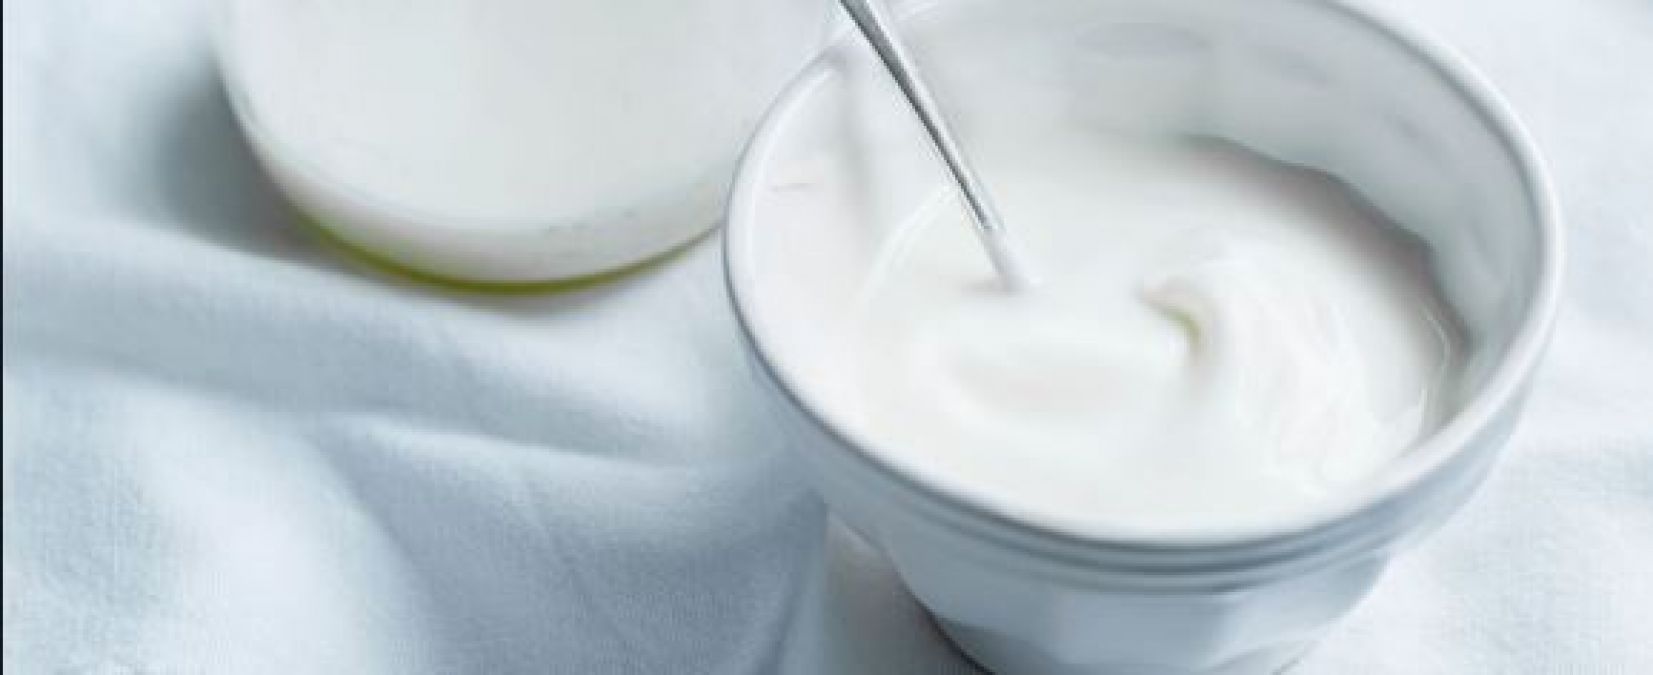 Should pregnant women eat curd, what are its benefits?And how much should eat